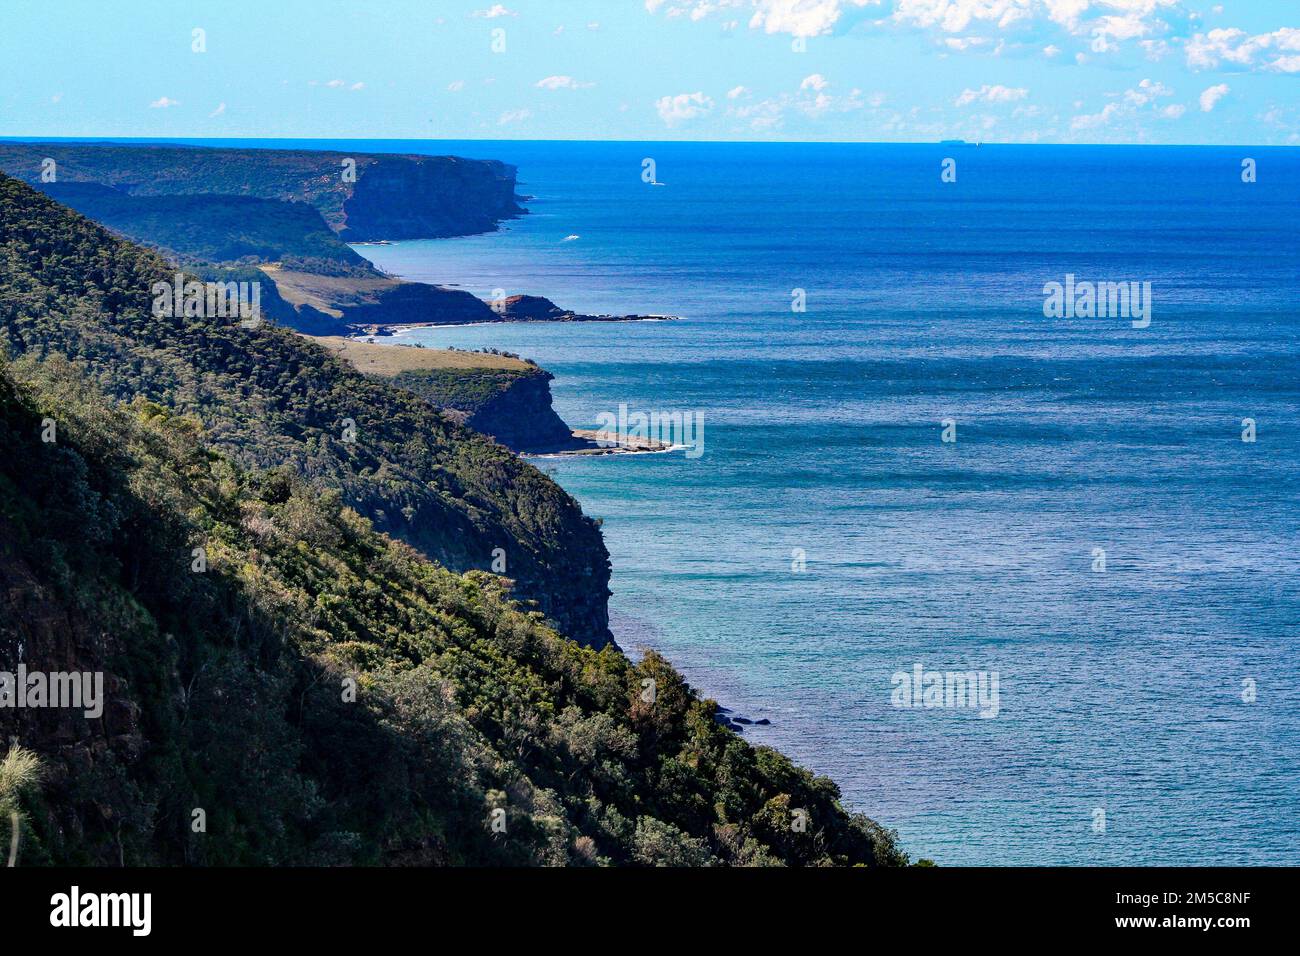 Rocky cliffs and hills leading down to the ocean in Wolongong, Australia Stock Photo